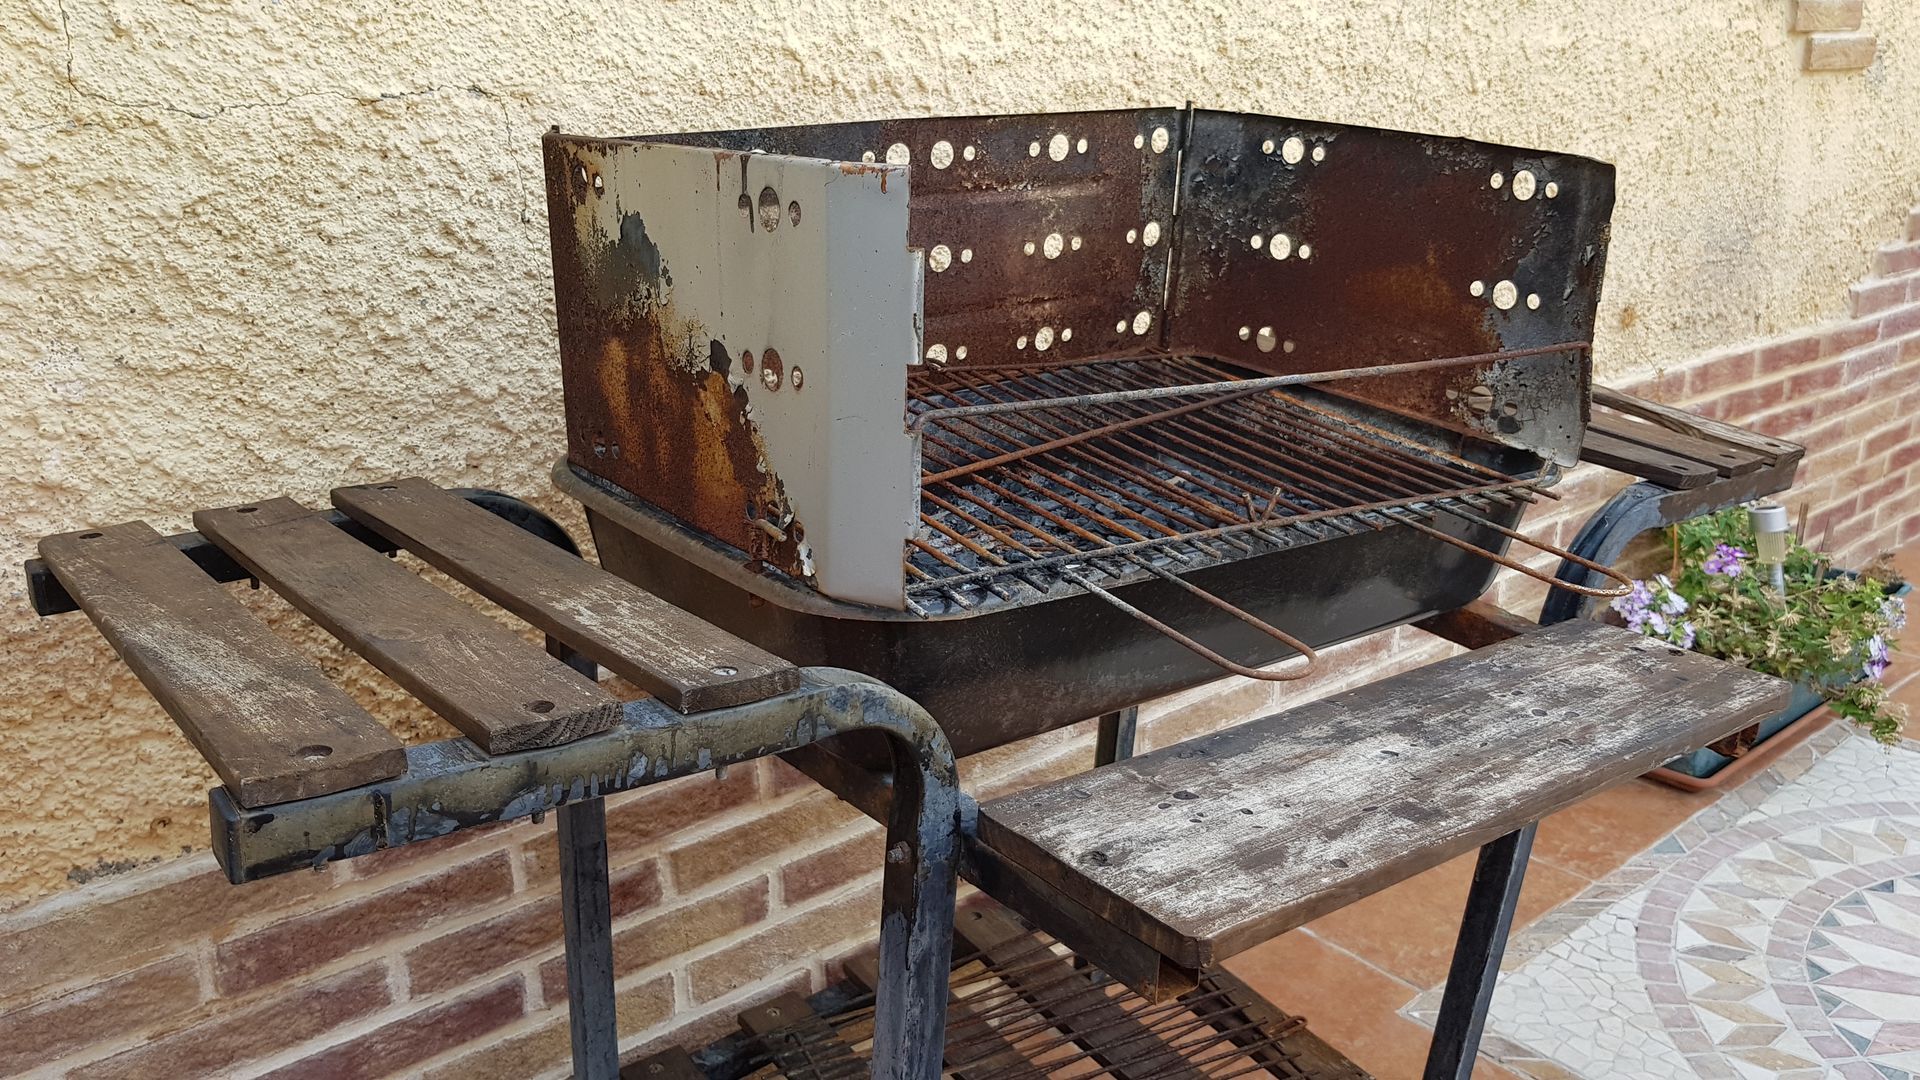 A rusty grill is sitting on a wooden table in front of a brick wall.